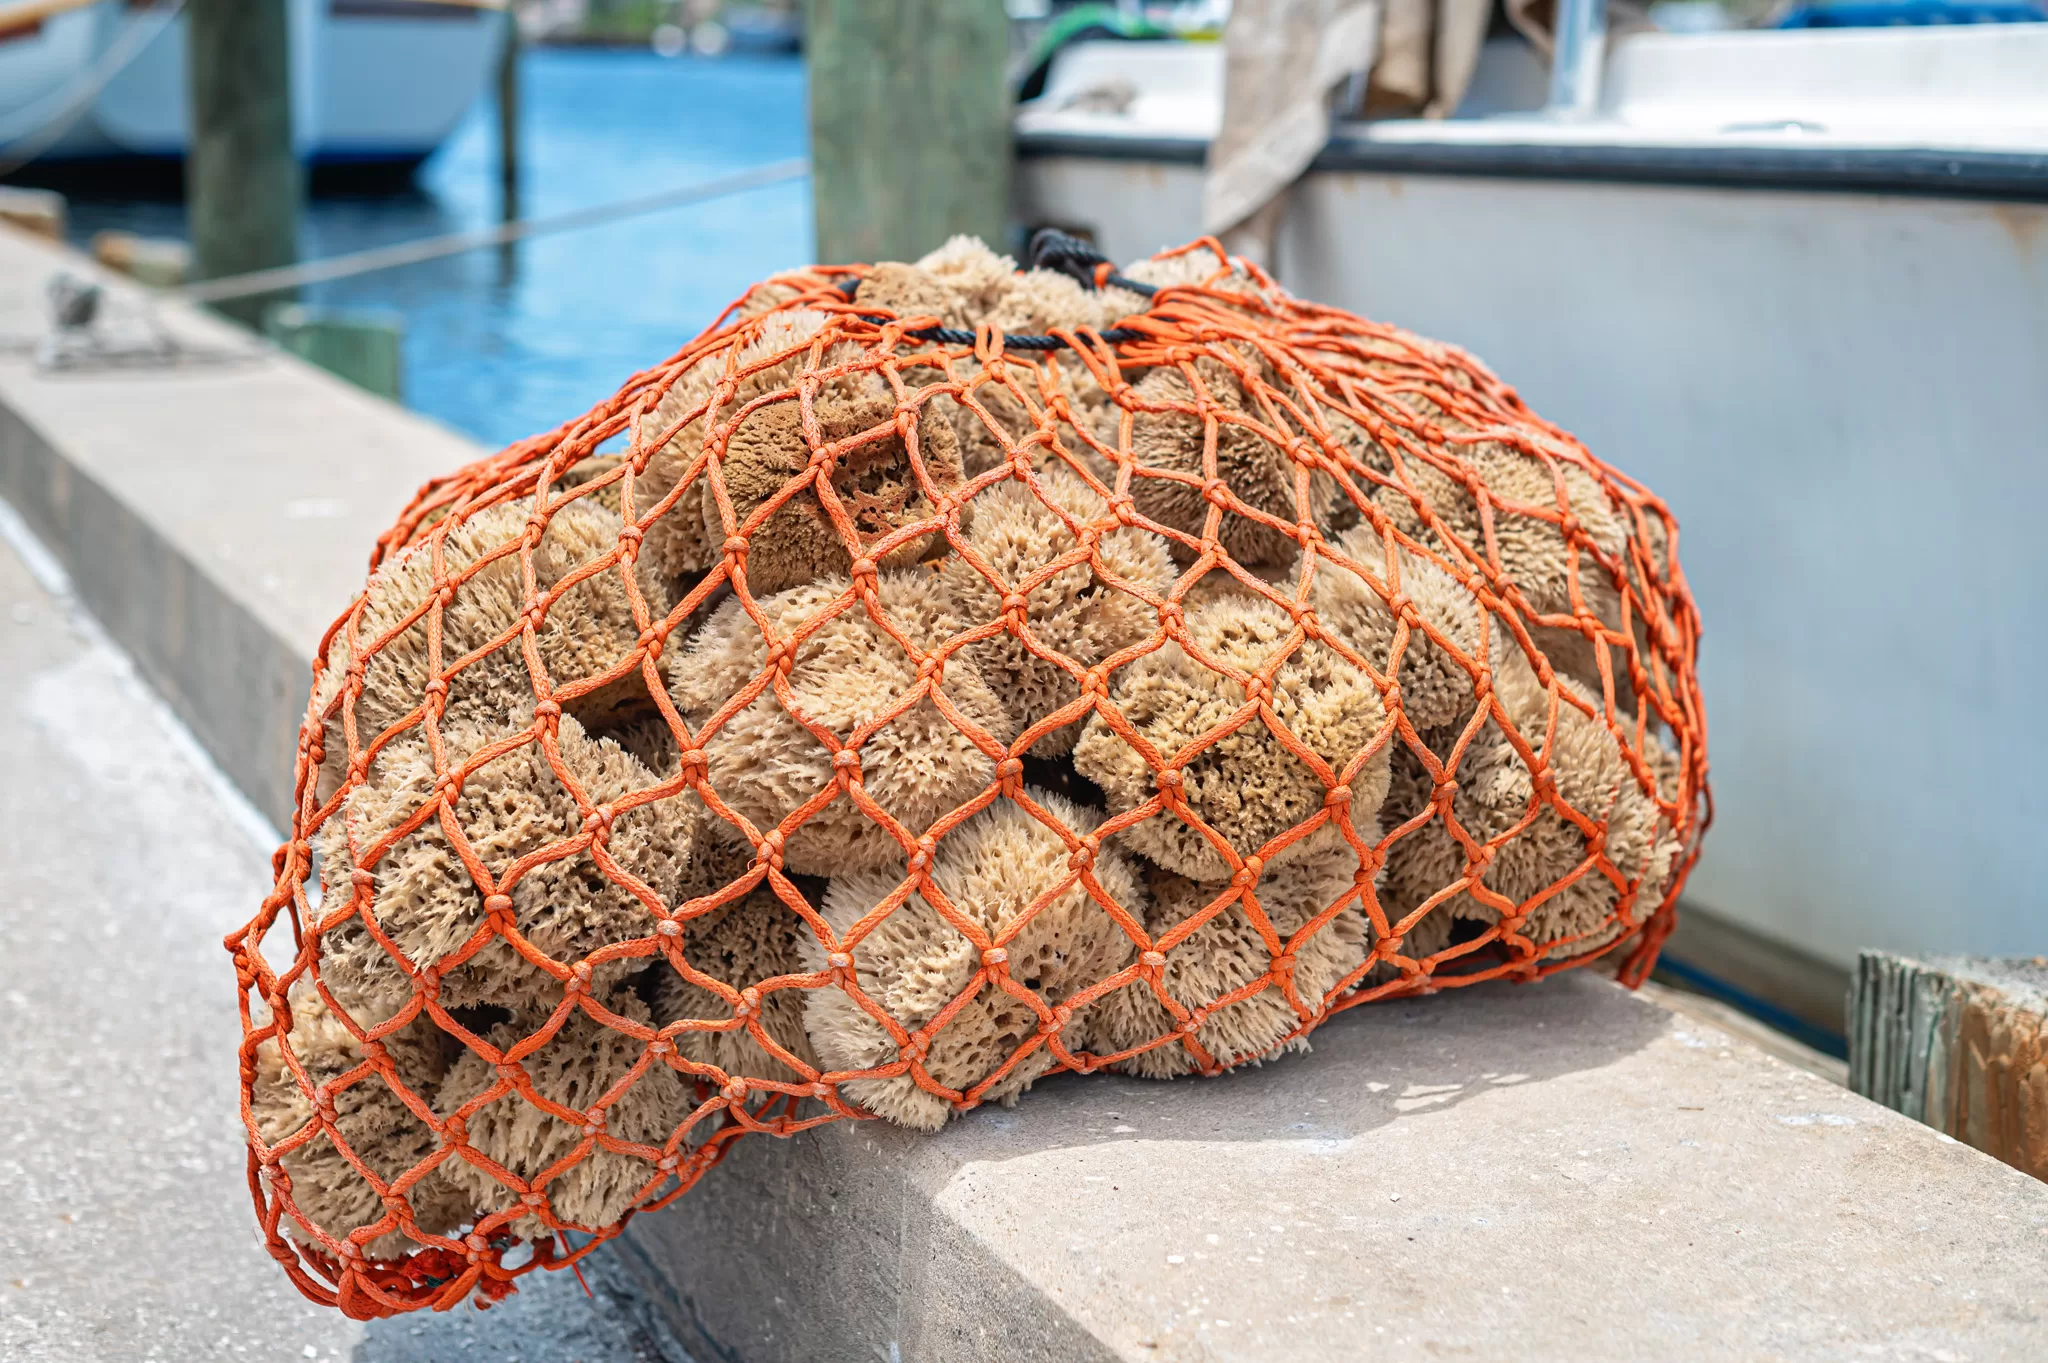 This image is for a blog post about Tarpon Springs Florida and shows a fresh net full of sea sponges that just cam off a greek boat.